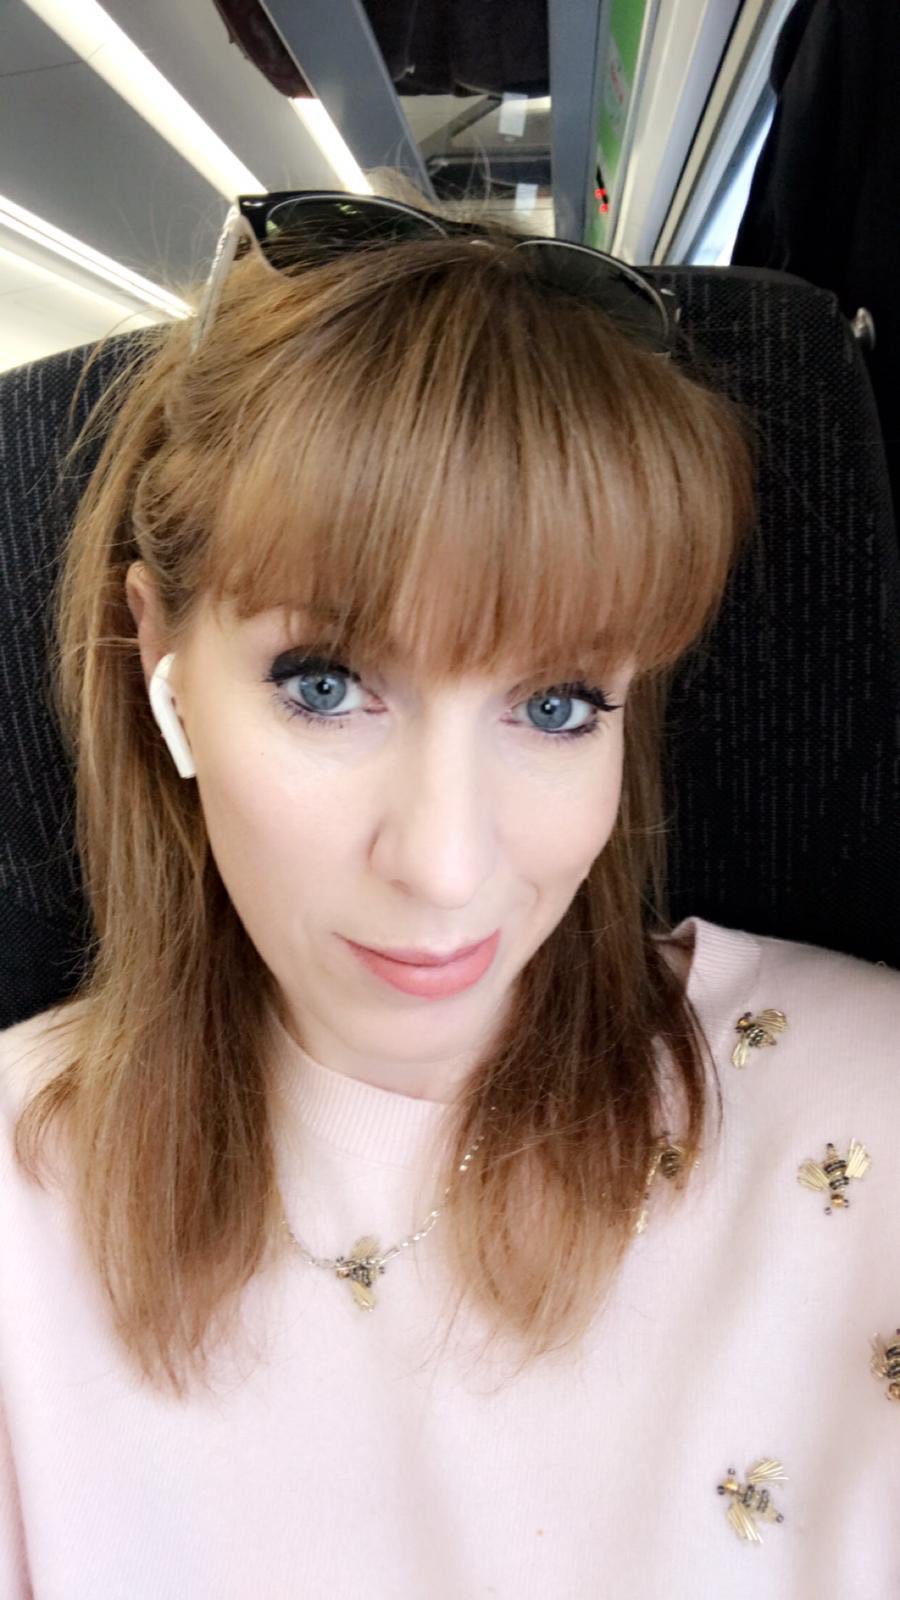 Labour’s deputy leader Angela Rayner claimed £249 personalised Apple AirPods on expenses